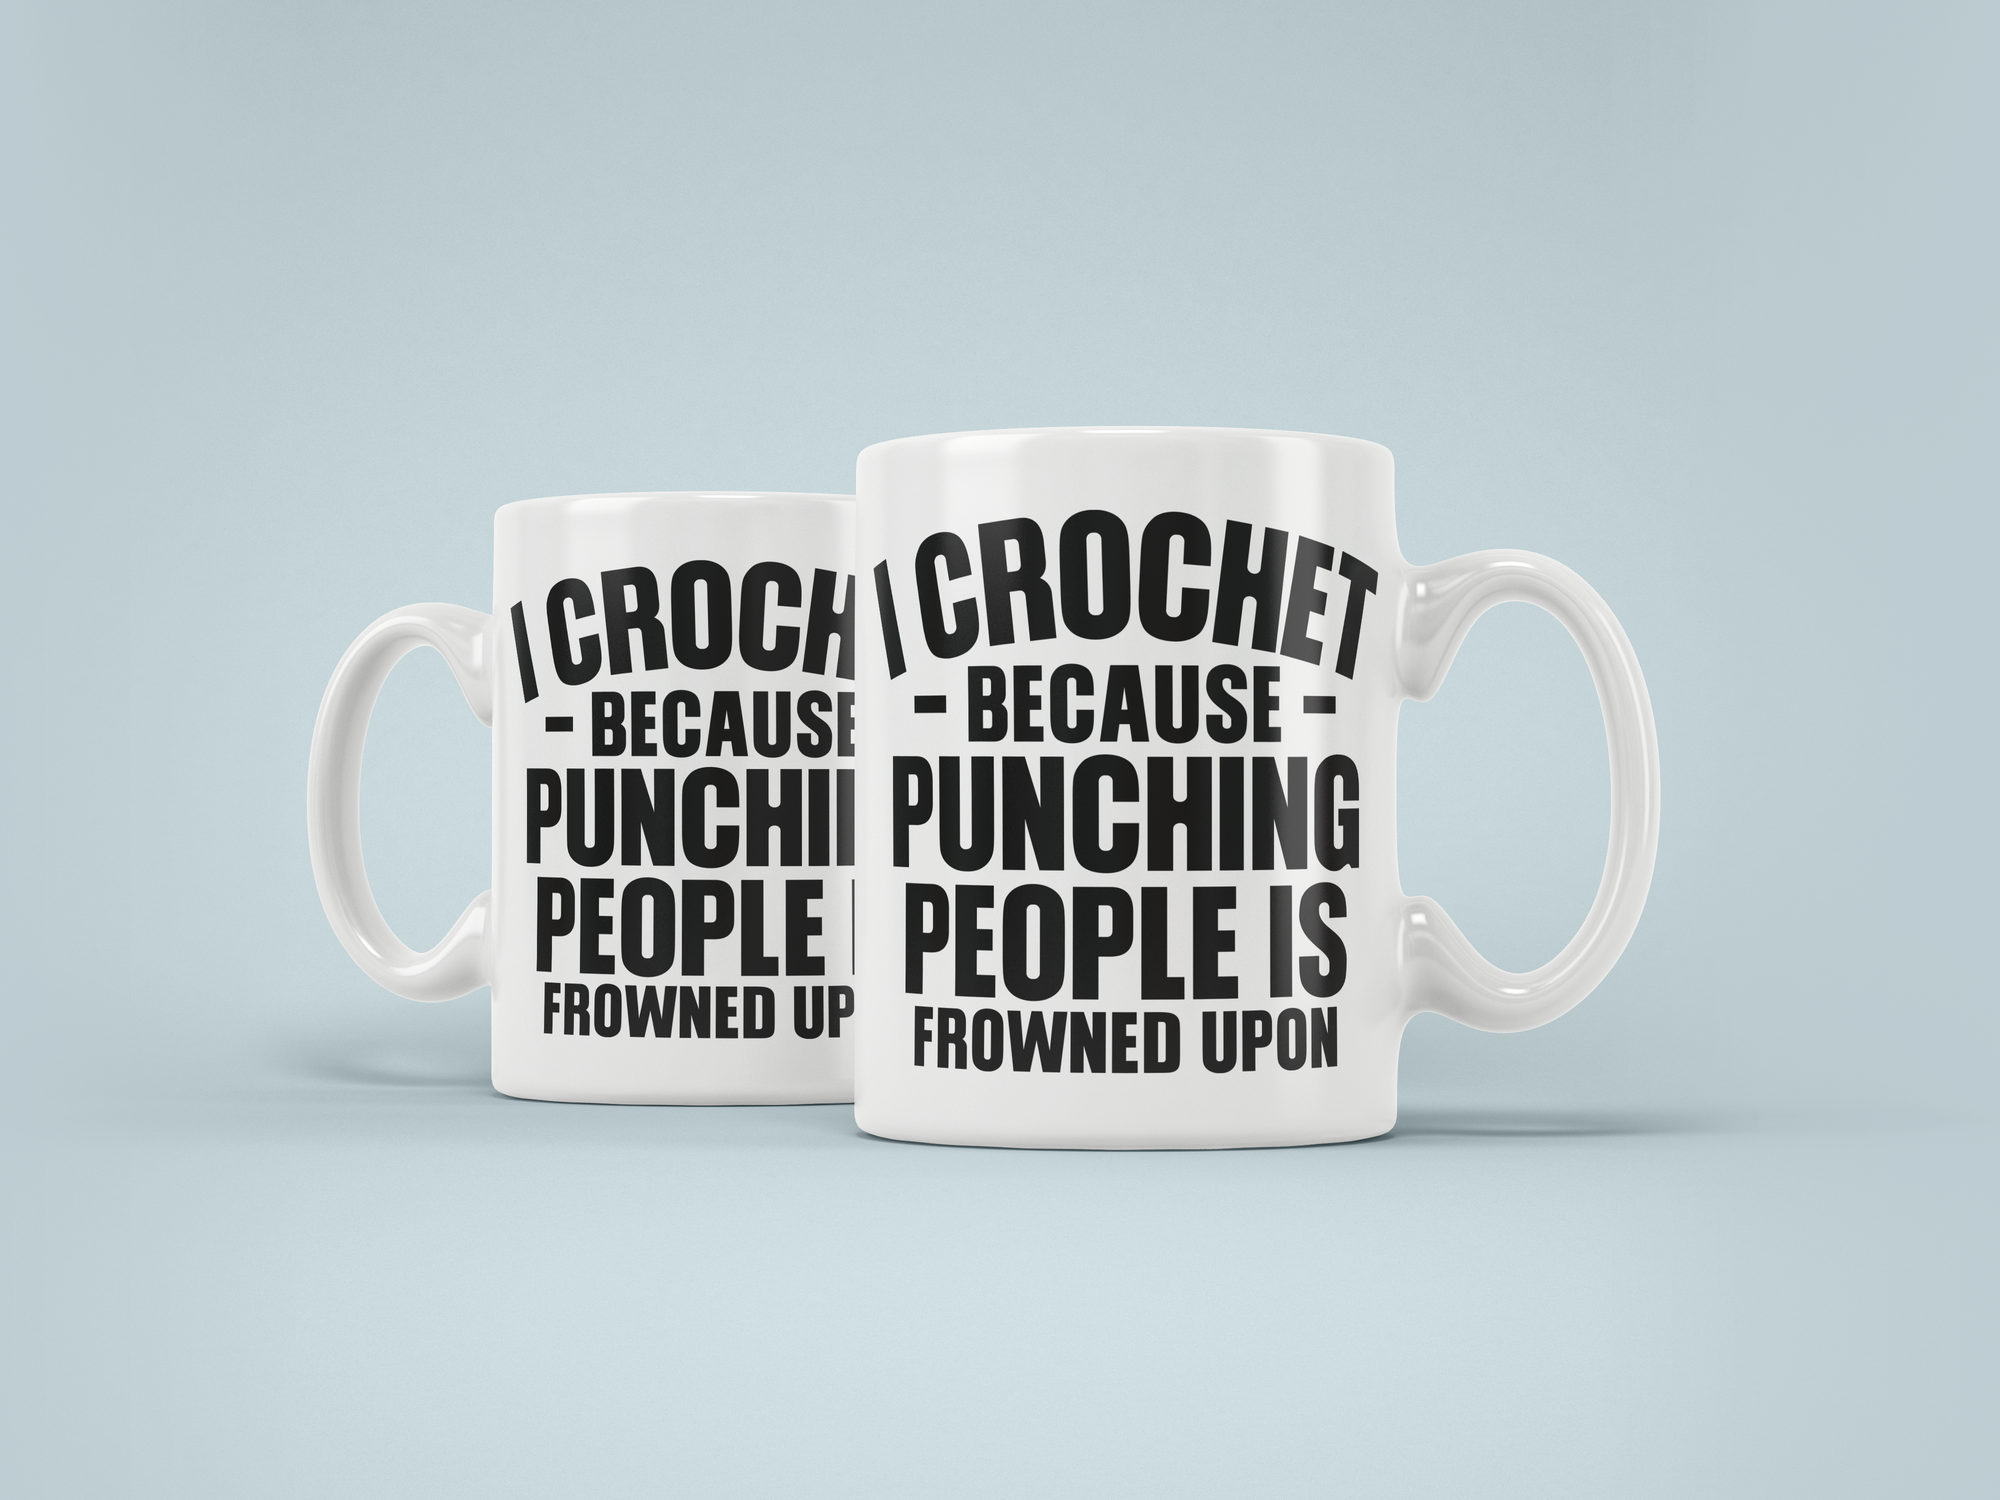 I Crocheting Because Punching People is Frowned Upon 11oz Mug